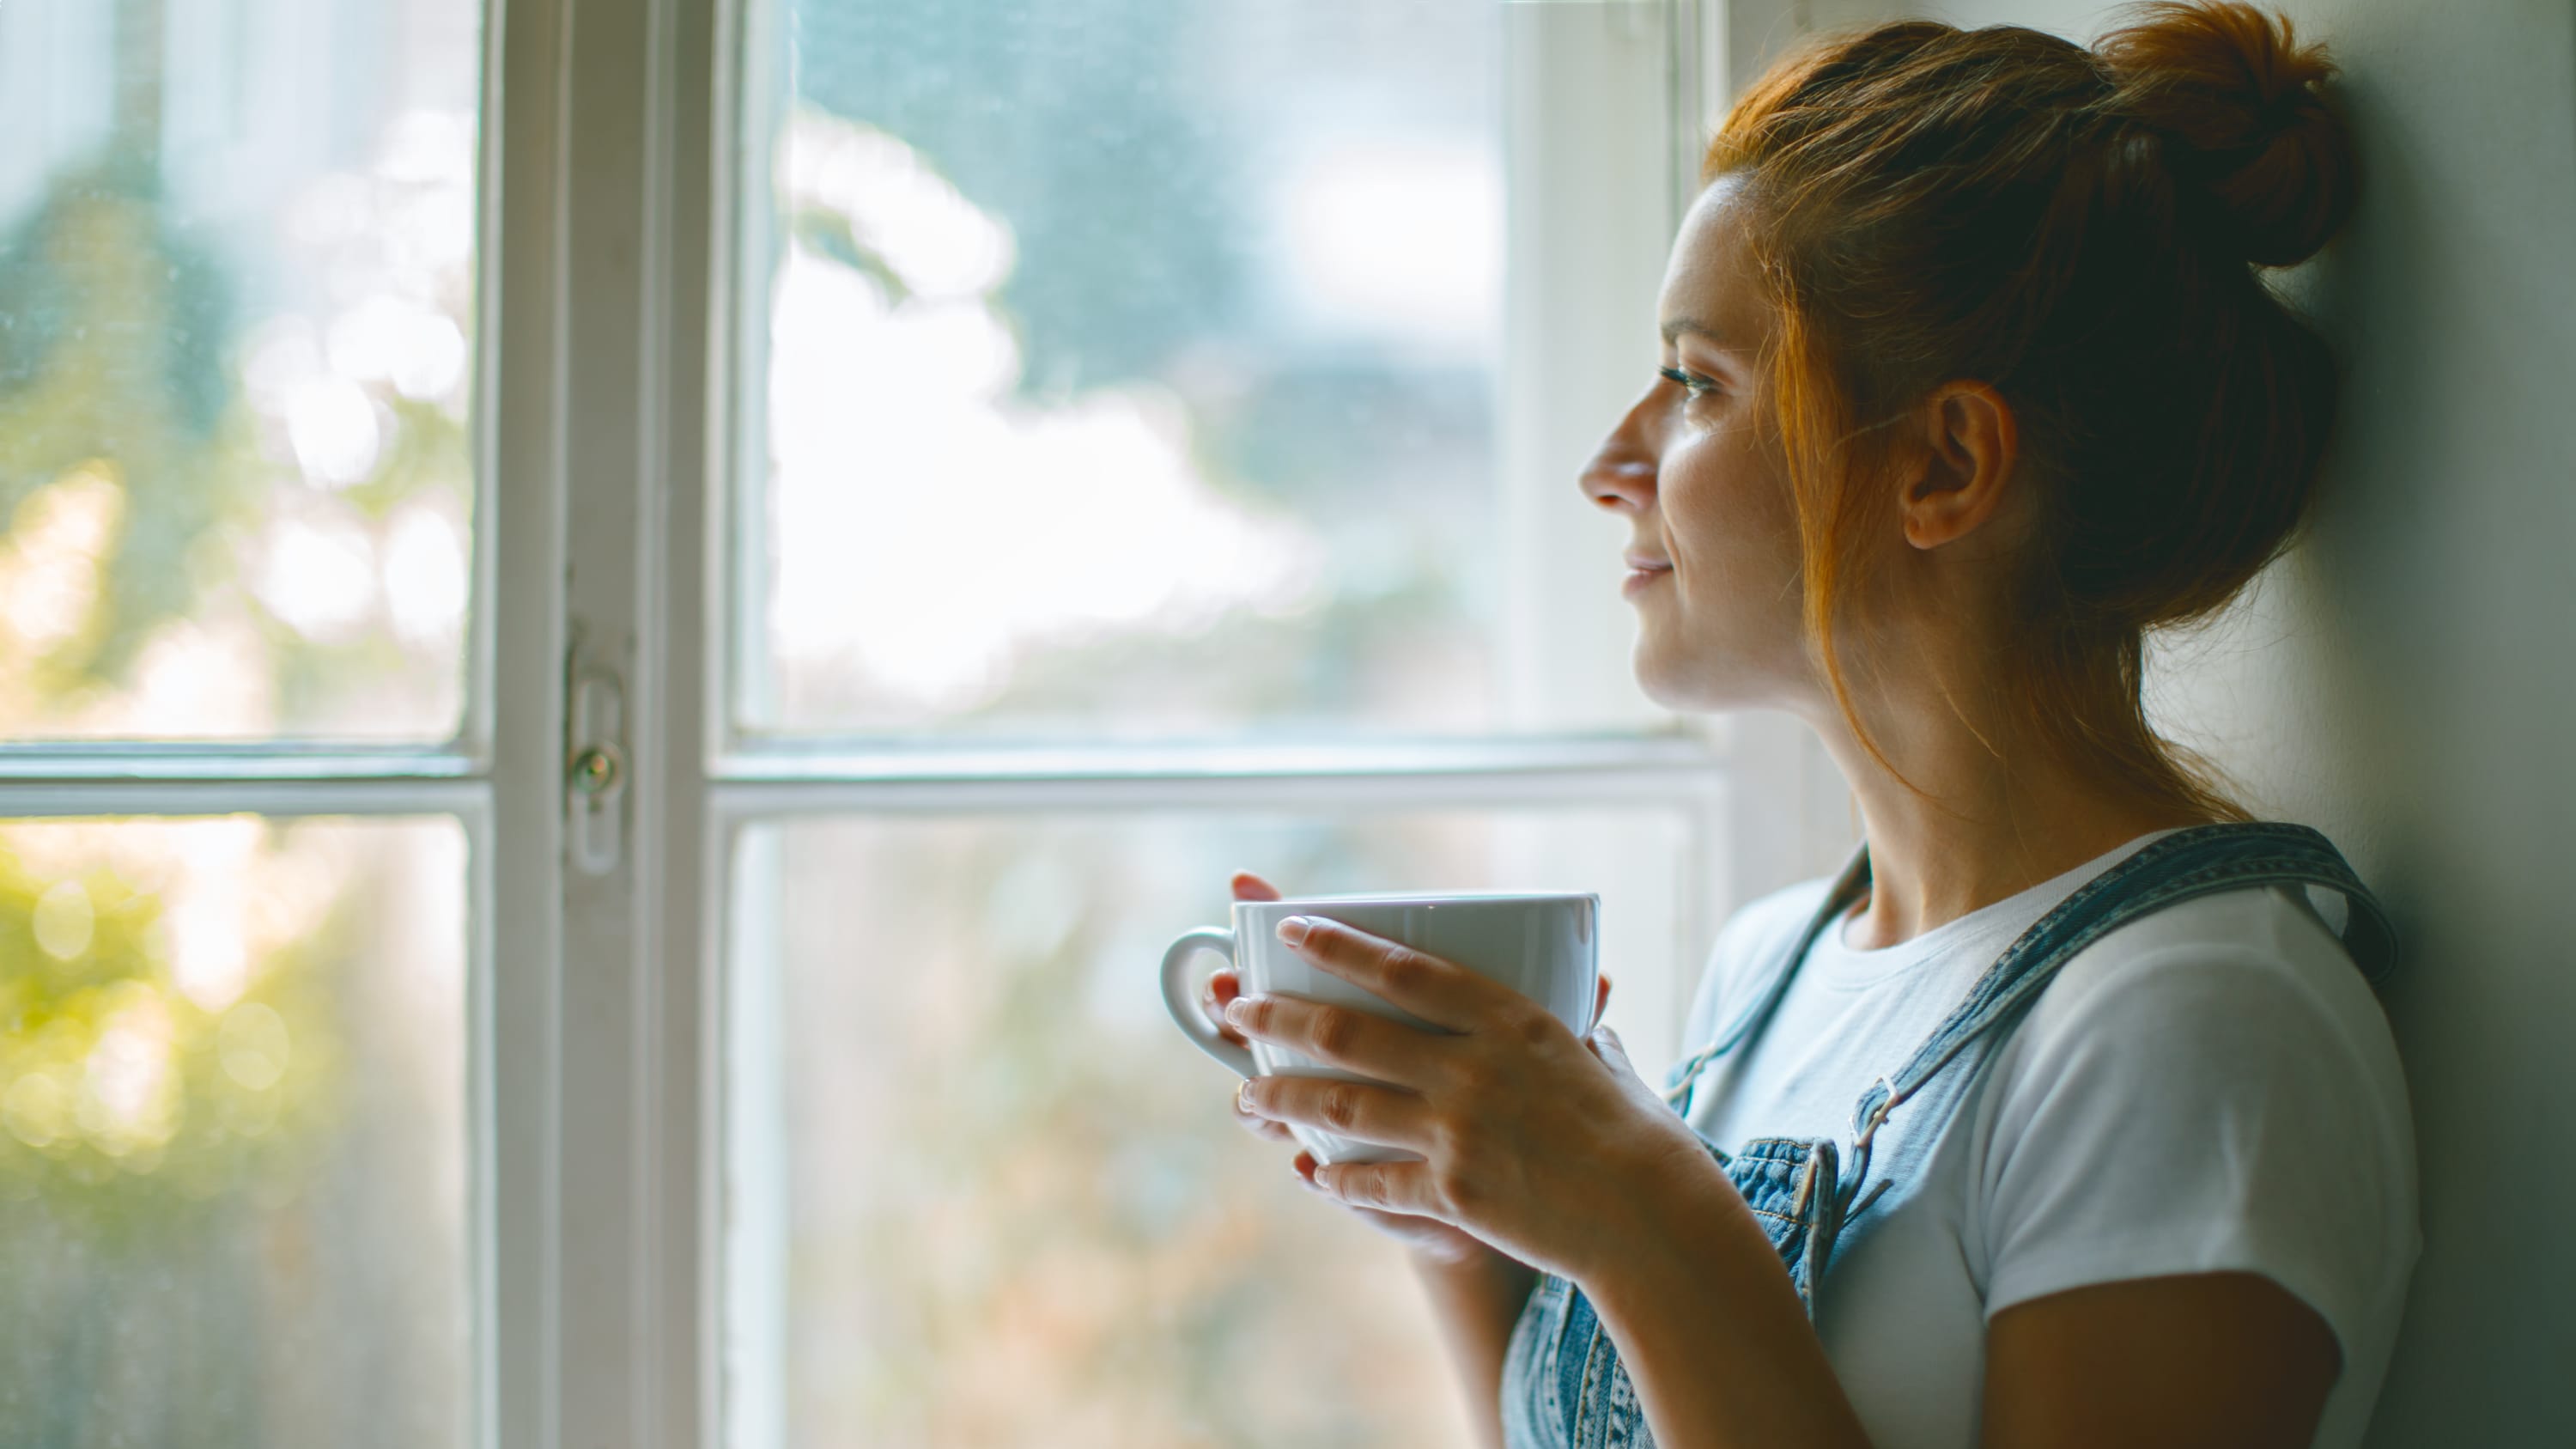 woman, who is a nonsmoker with lung cancer, looking out window after